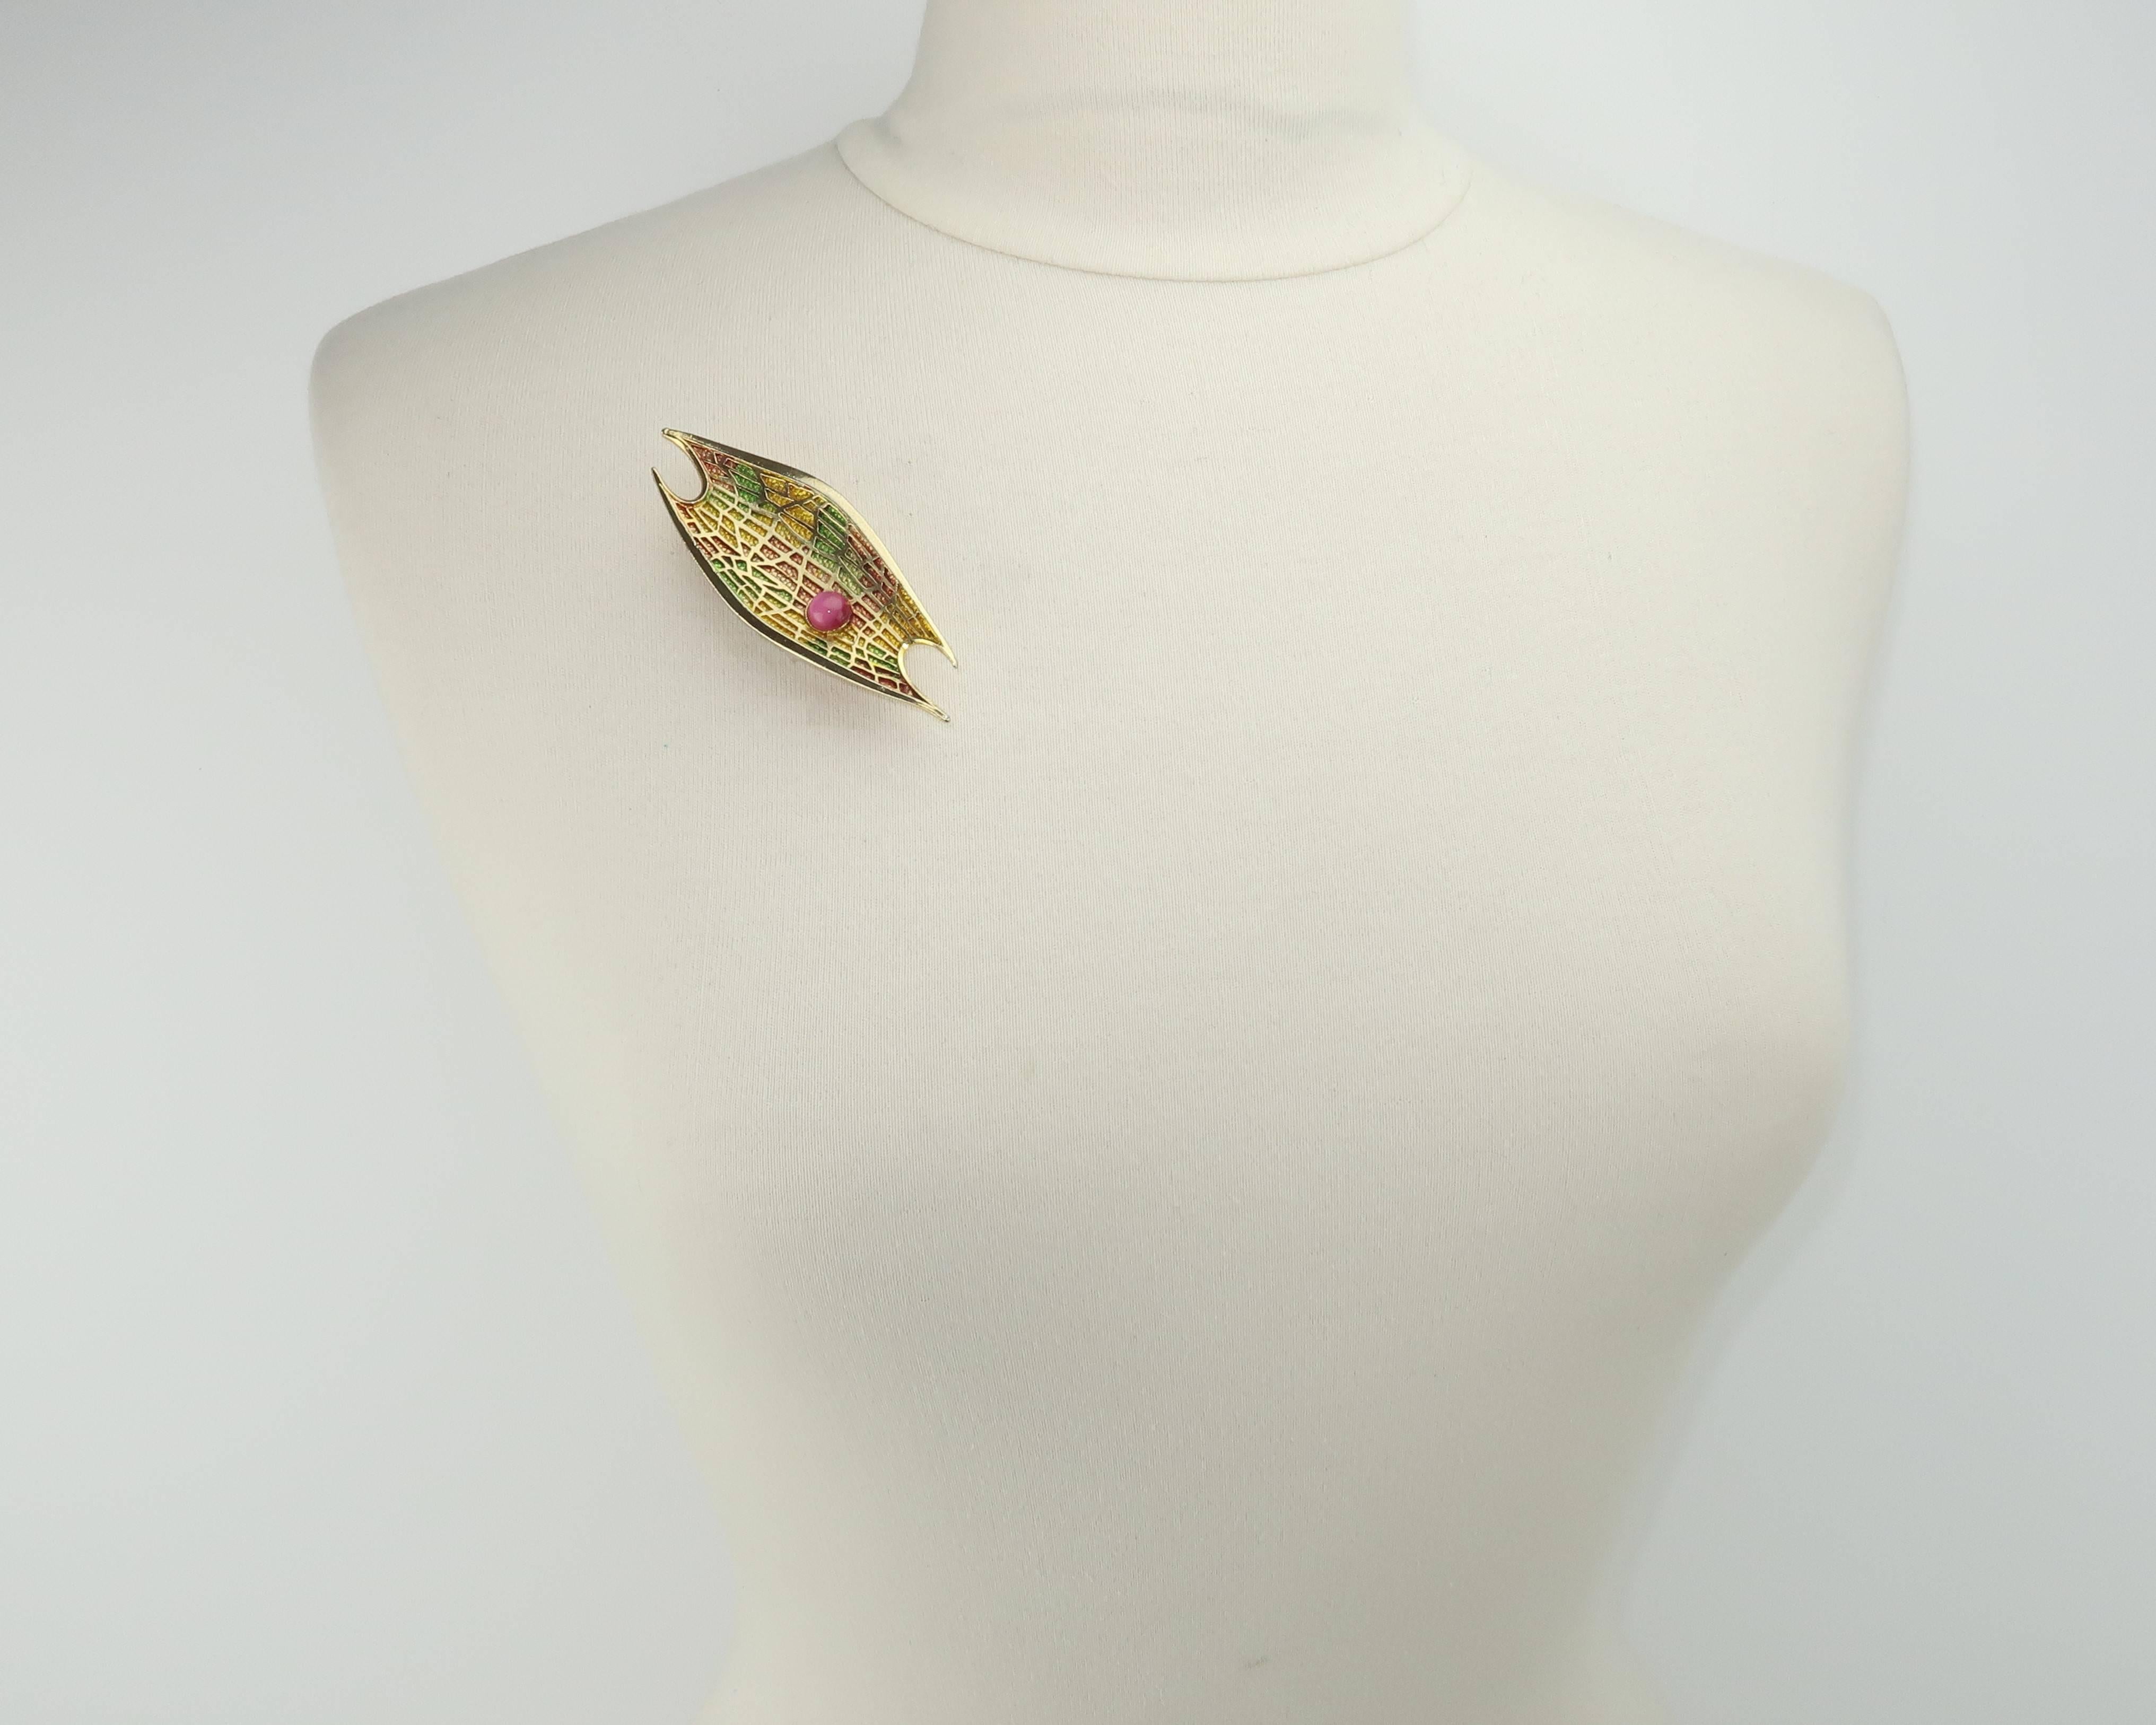 Circa 1970 Abstract Modernist Gold Tone Brooch With Pink Cabochon 5